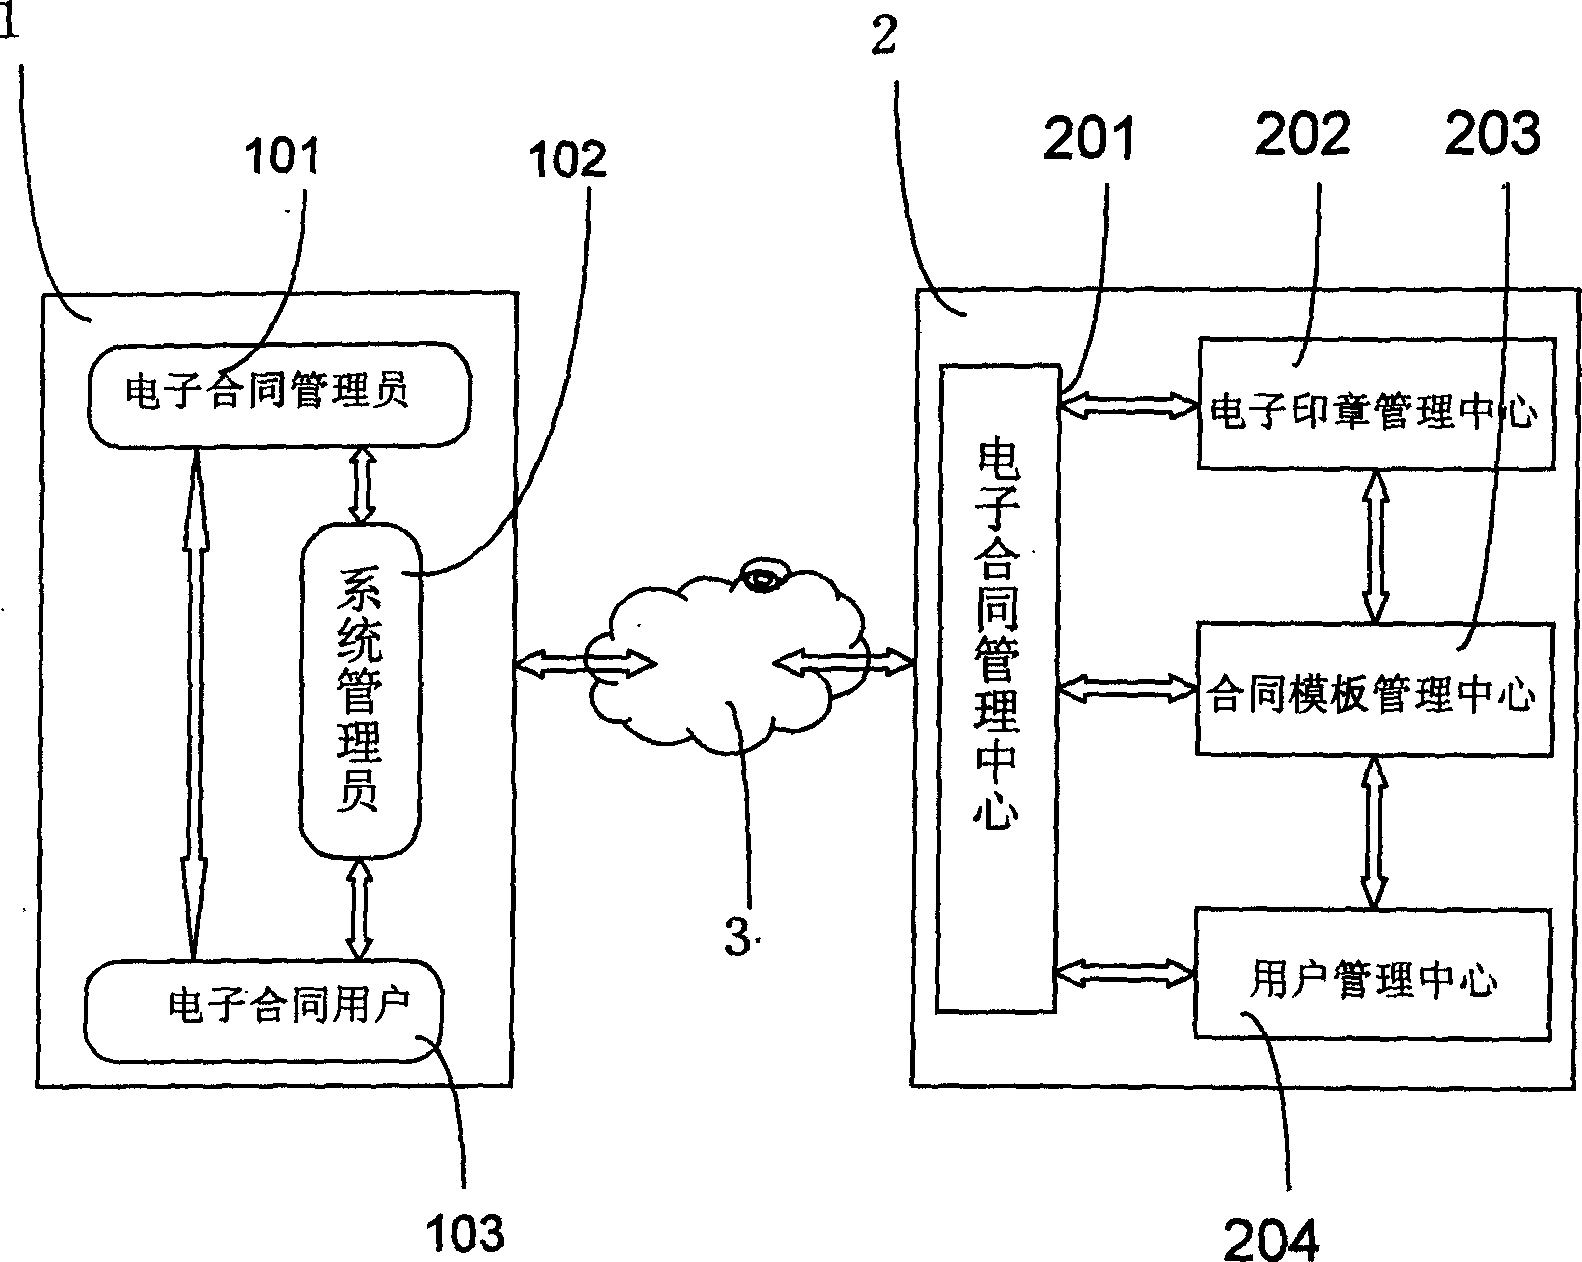 Electronic contract managing system operation platform